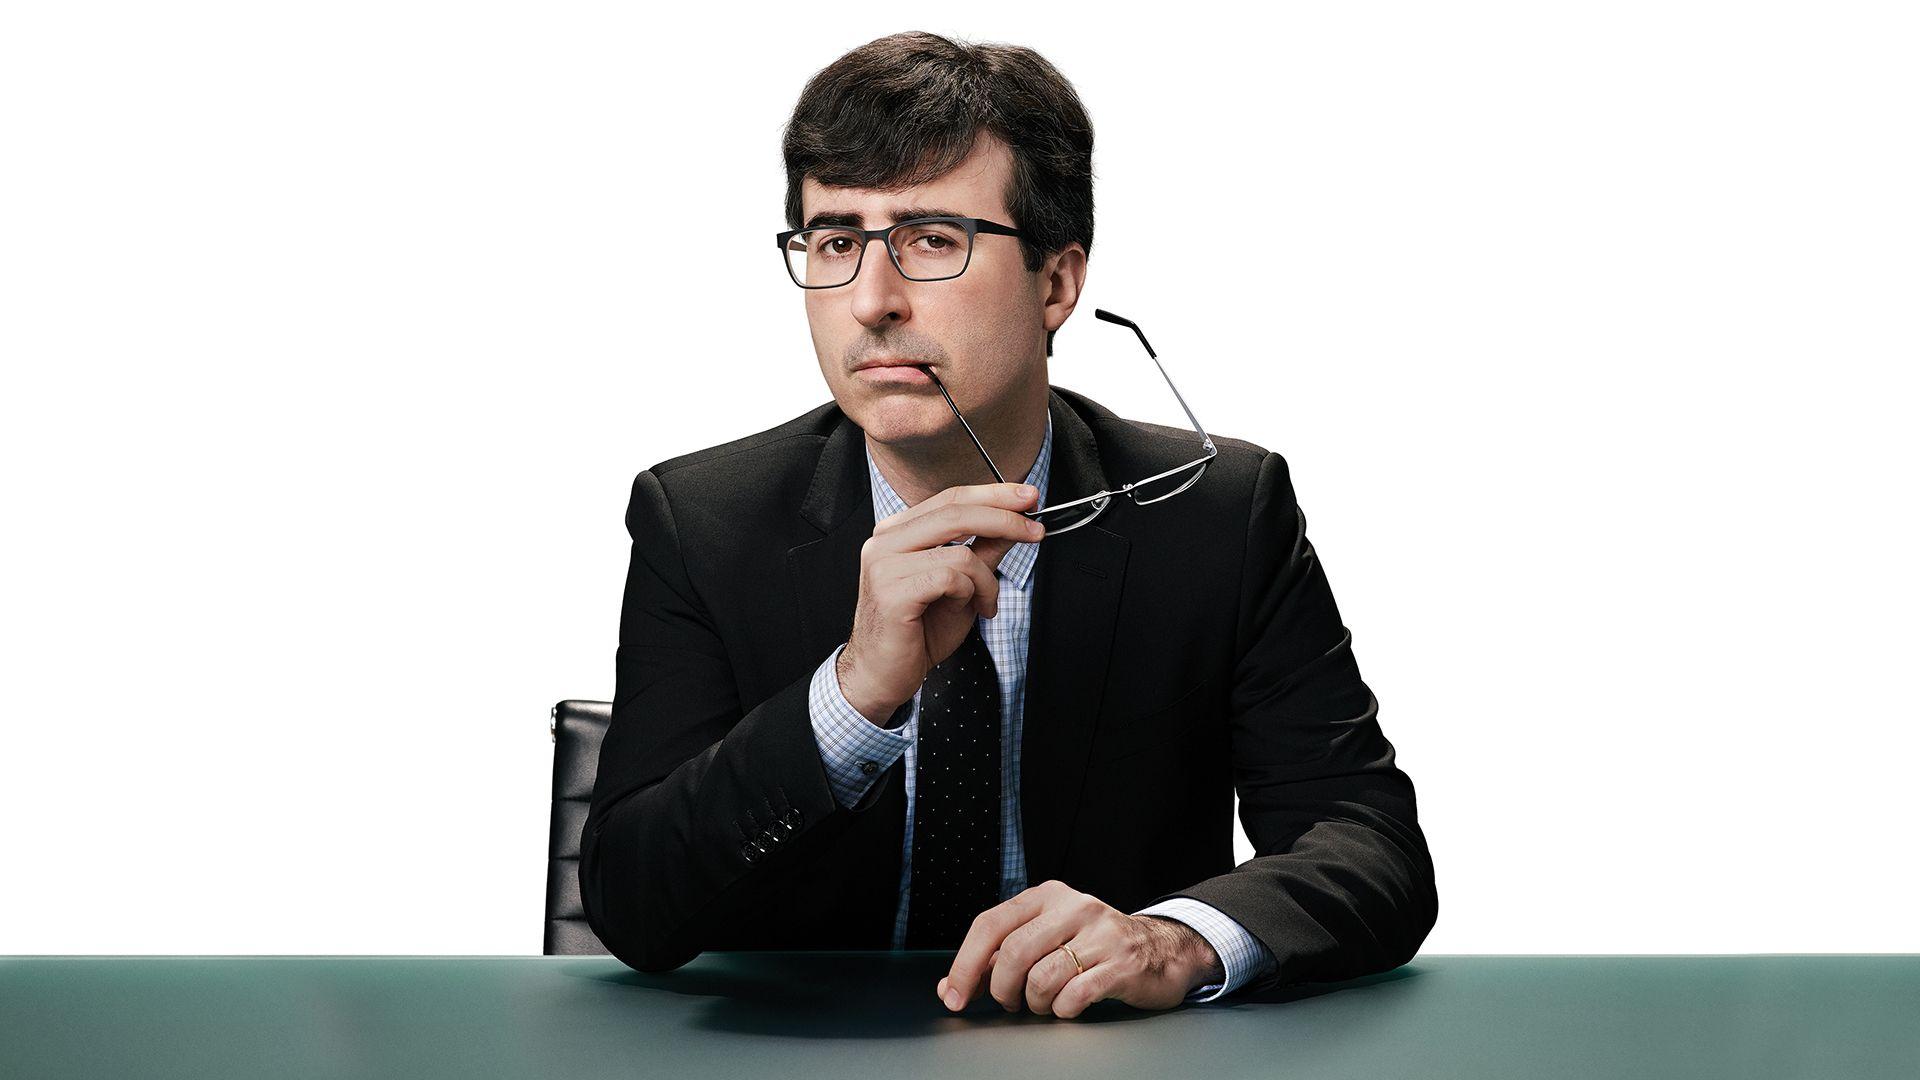 Last Week Tonight with John Oliver Full HD Wallpaper and Background